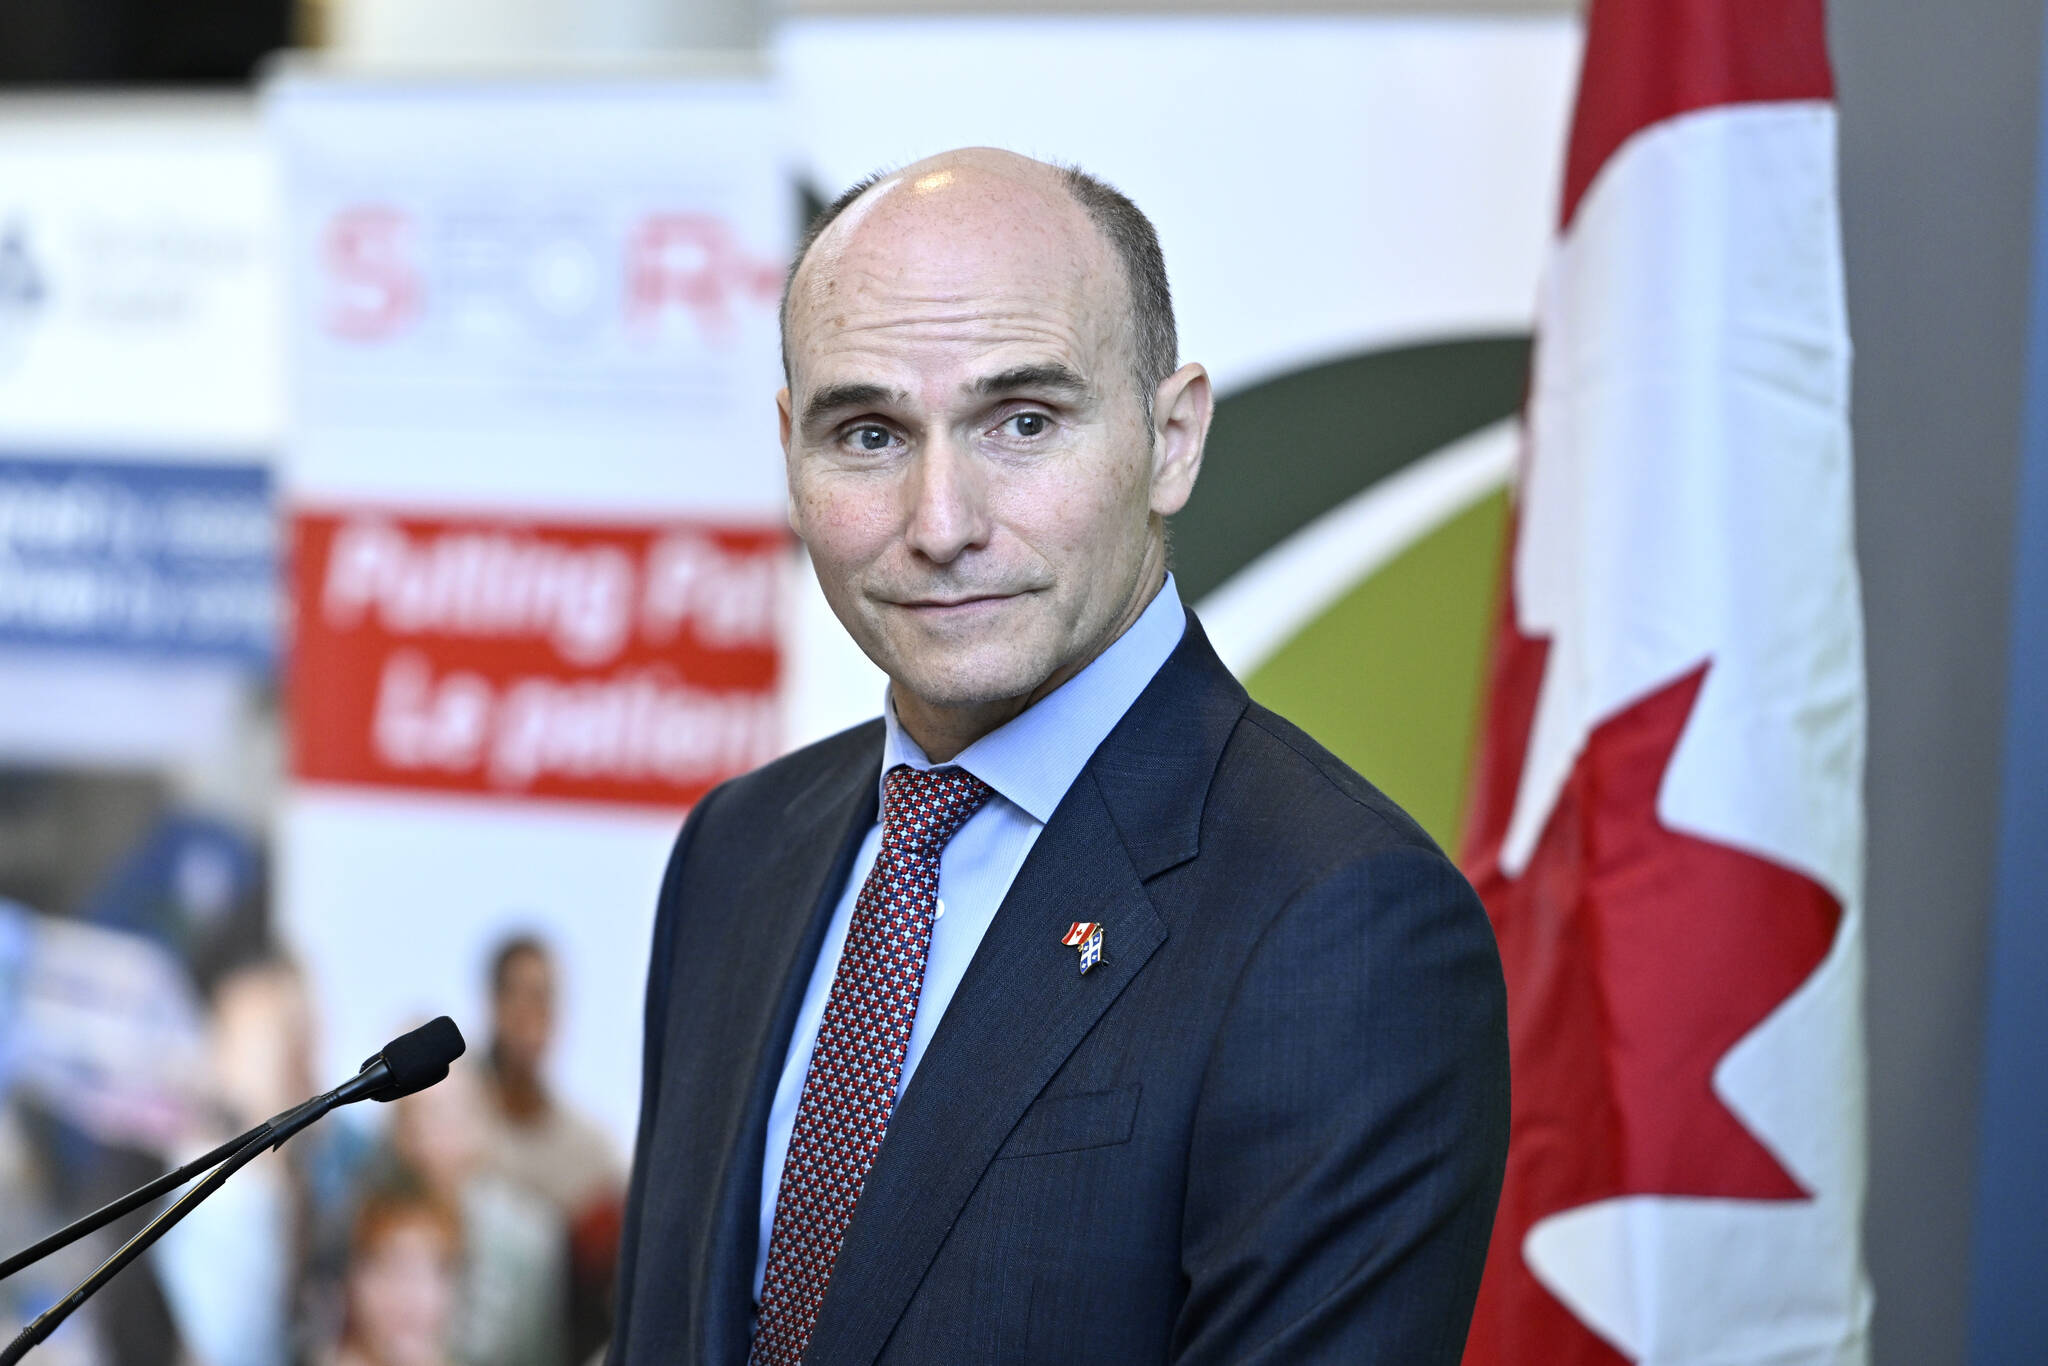 Minister of Health Jean-Yves Duclos speaks during a news conference on patient-oriented research at the Ottawa Hospital, in Ottawa, Monday, Oct. 24, 2022. THE CANADIAN PRESS/Justin Tang